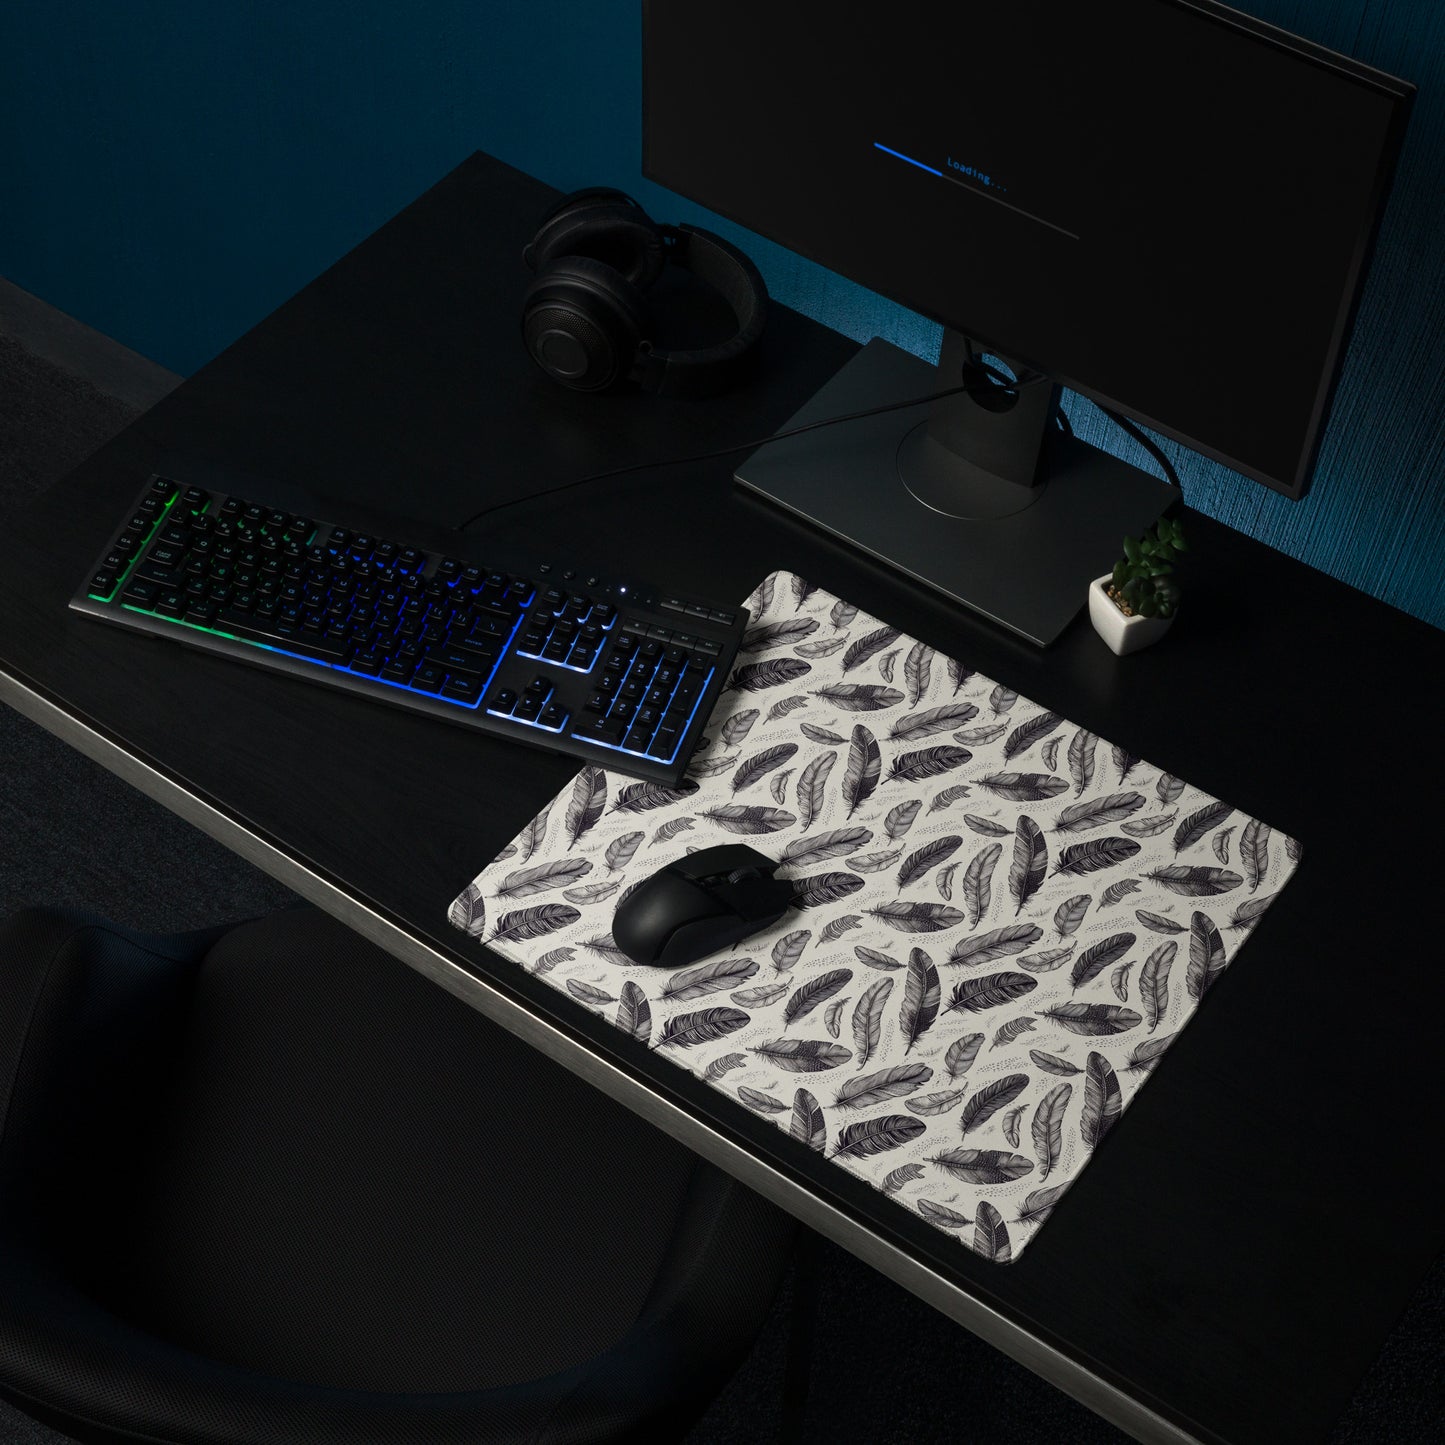 An 18" x 16" gaming desk pad with black and white feathers. It sits on a black desk with a keyboard, mouse, and monitor.